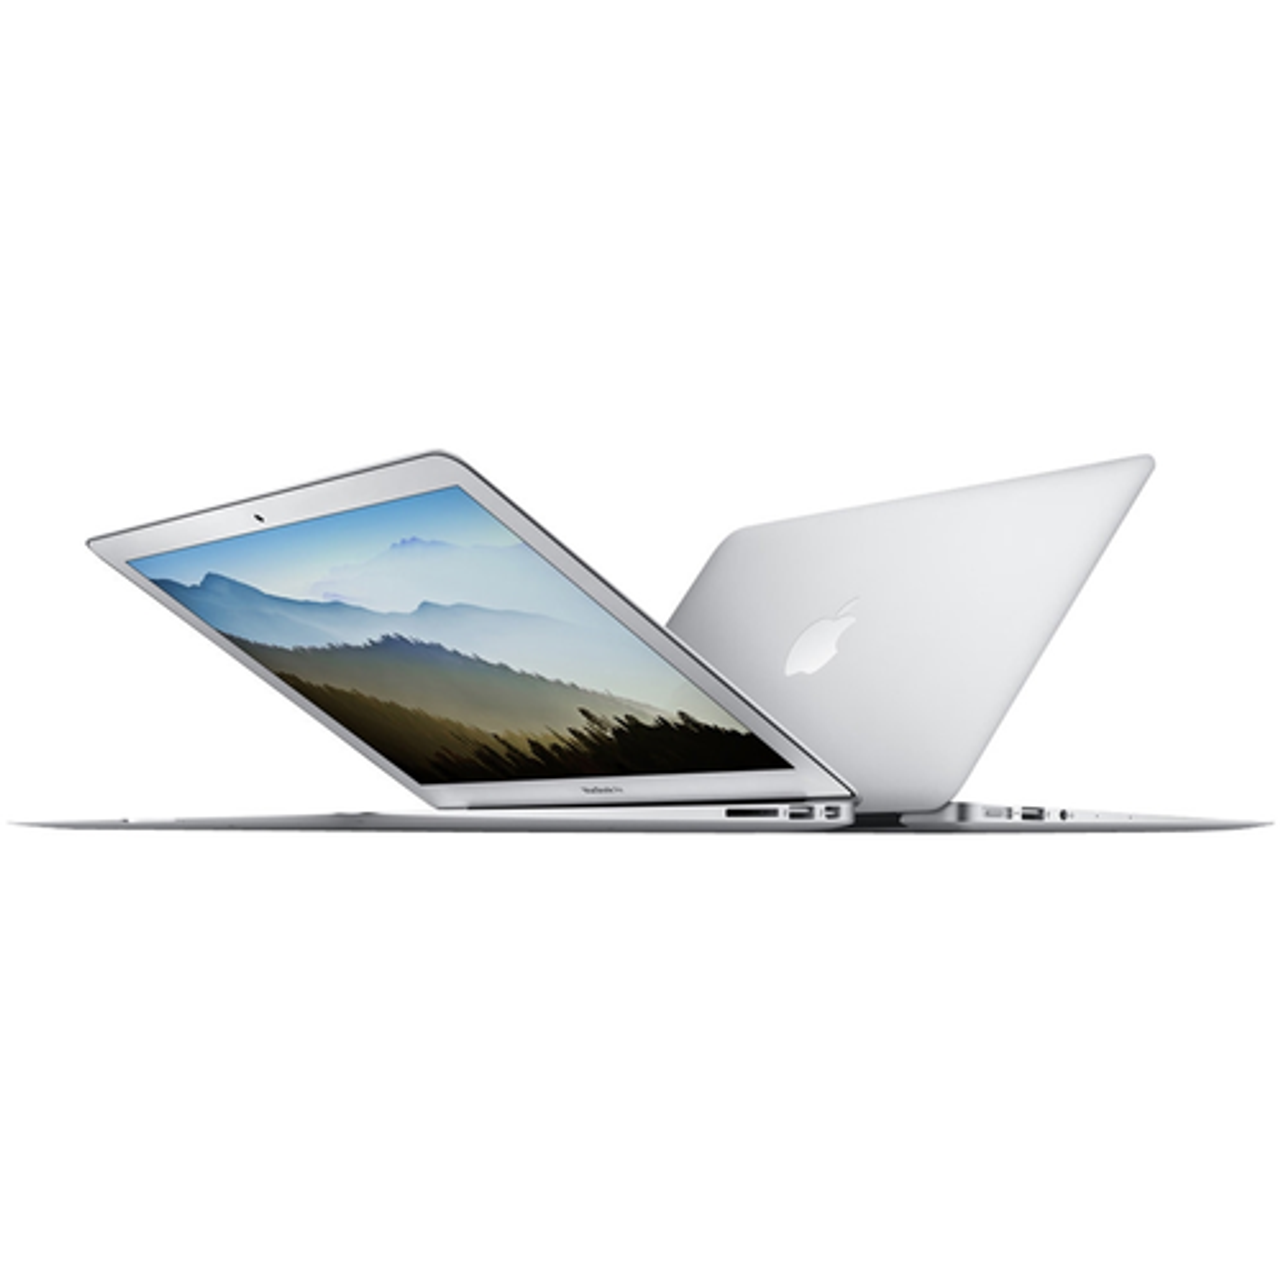 Apple MacBook Air 13.3" Certified Refurbished - Intel Core i5 with 4GB Memory - 128GB Flash Storage SSD (2015) - Silver